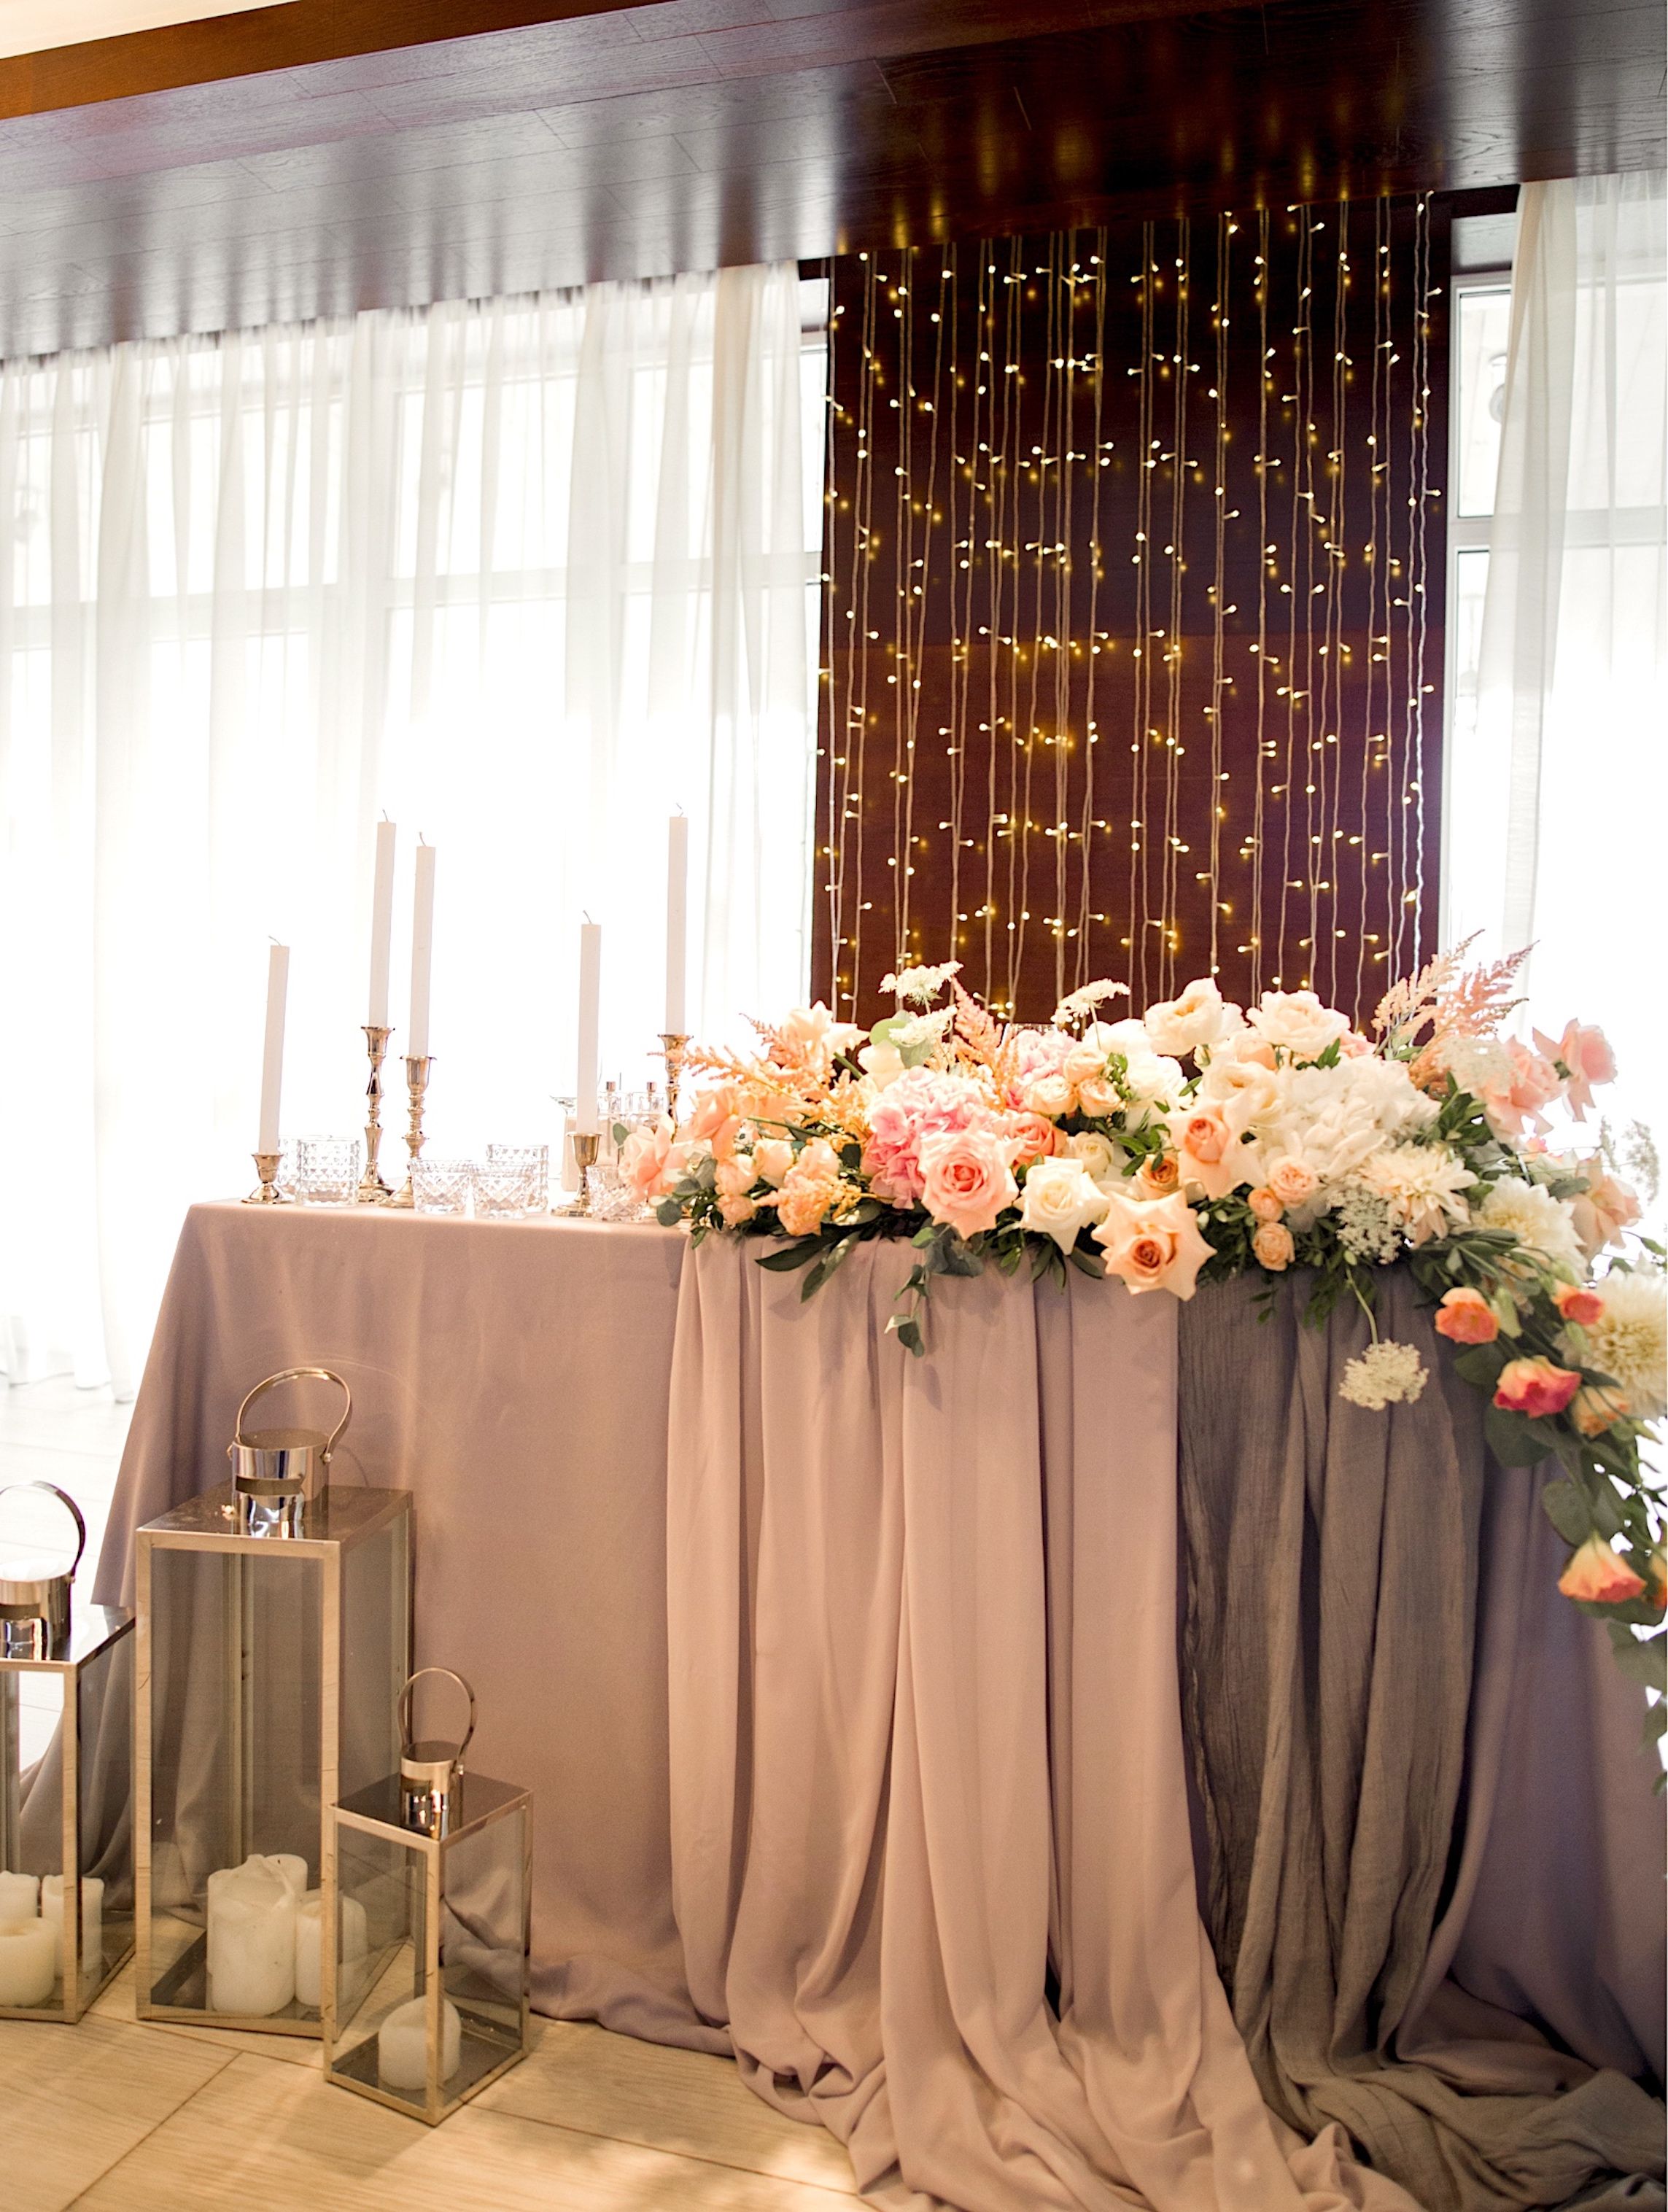 Ceremony Flowers or Head Table Flowers